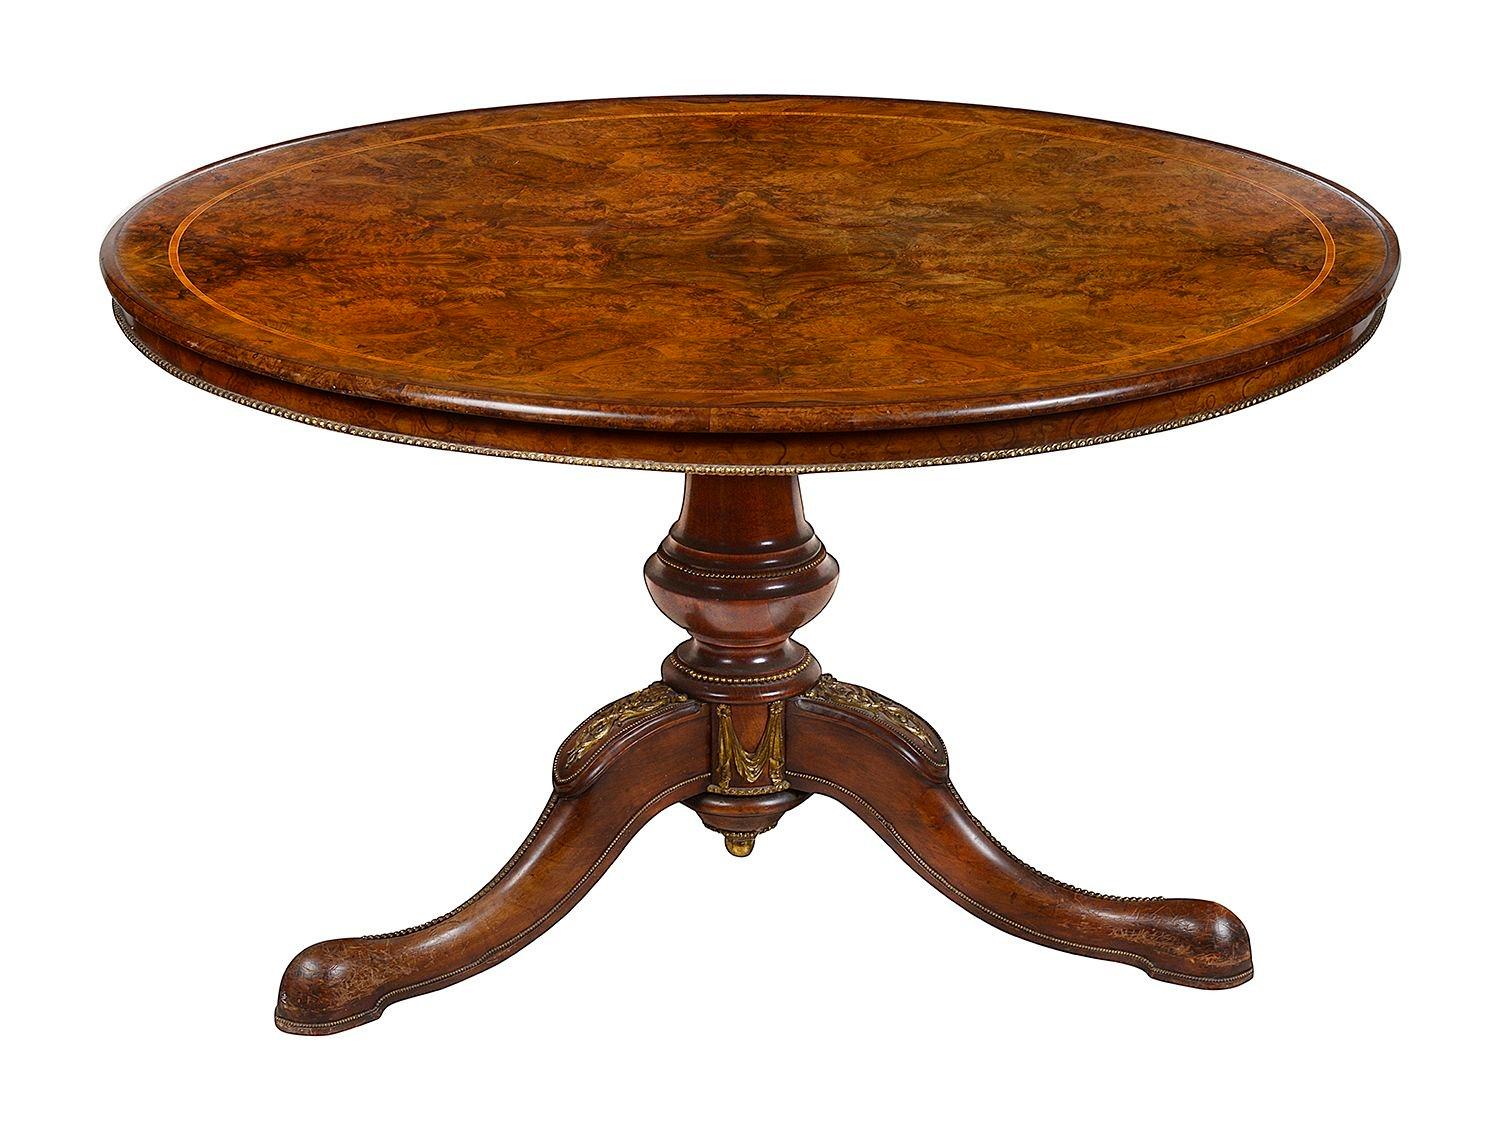 A fine quality Victorian period Burr Walnut centre table, with Tulip wood inlaid cross banding, raised on a tripod base with gilded ormolu mounts and mouldings.
In the manner of Holland and Son.
Holland and Sons Antique Furniture (1803 – 1942) were